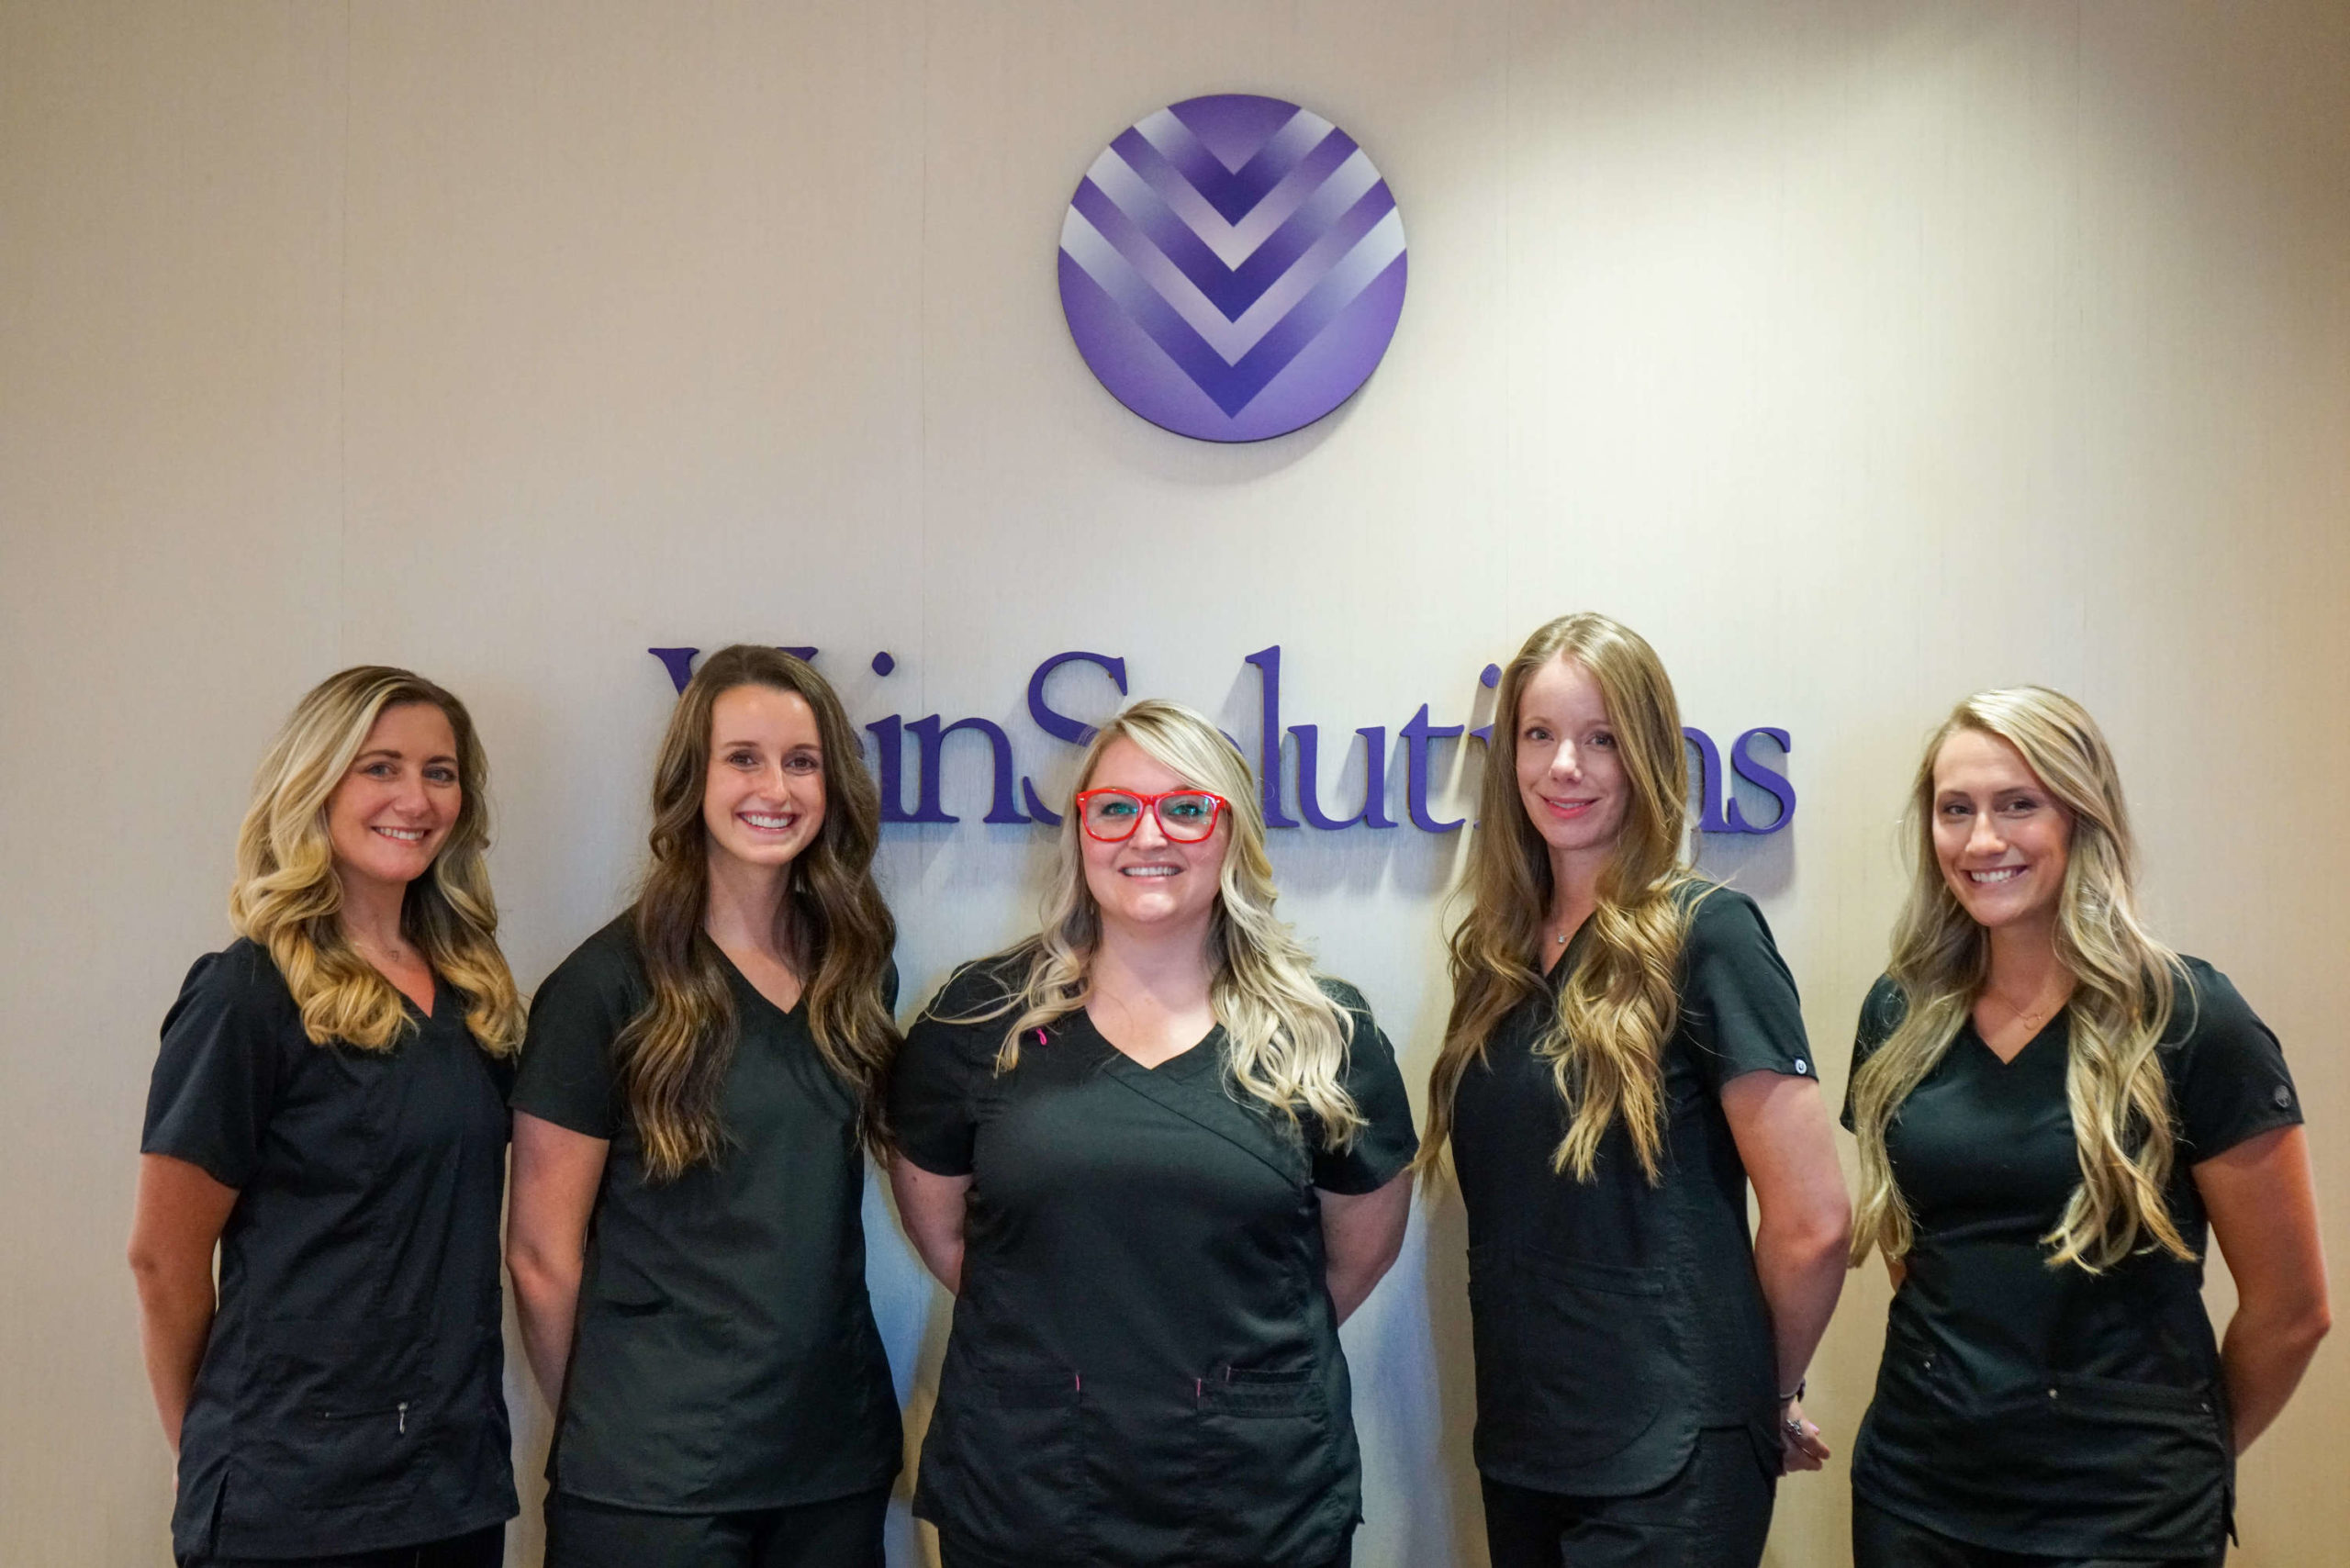 Trained nursing staff at Vein Solutions Michigan who diagnose and help treat vein disease and disorders.